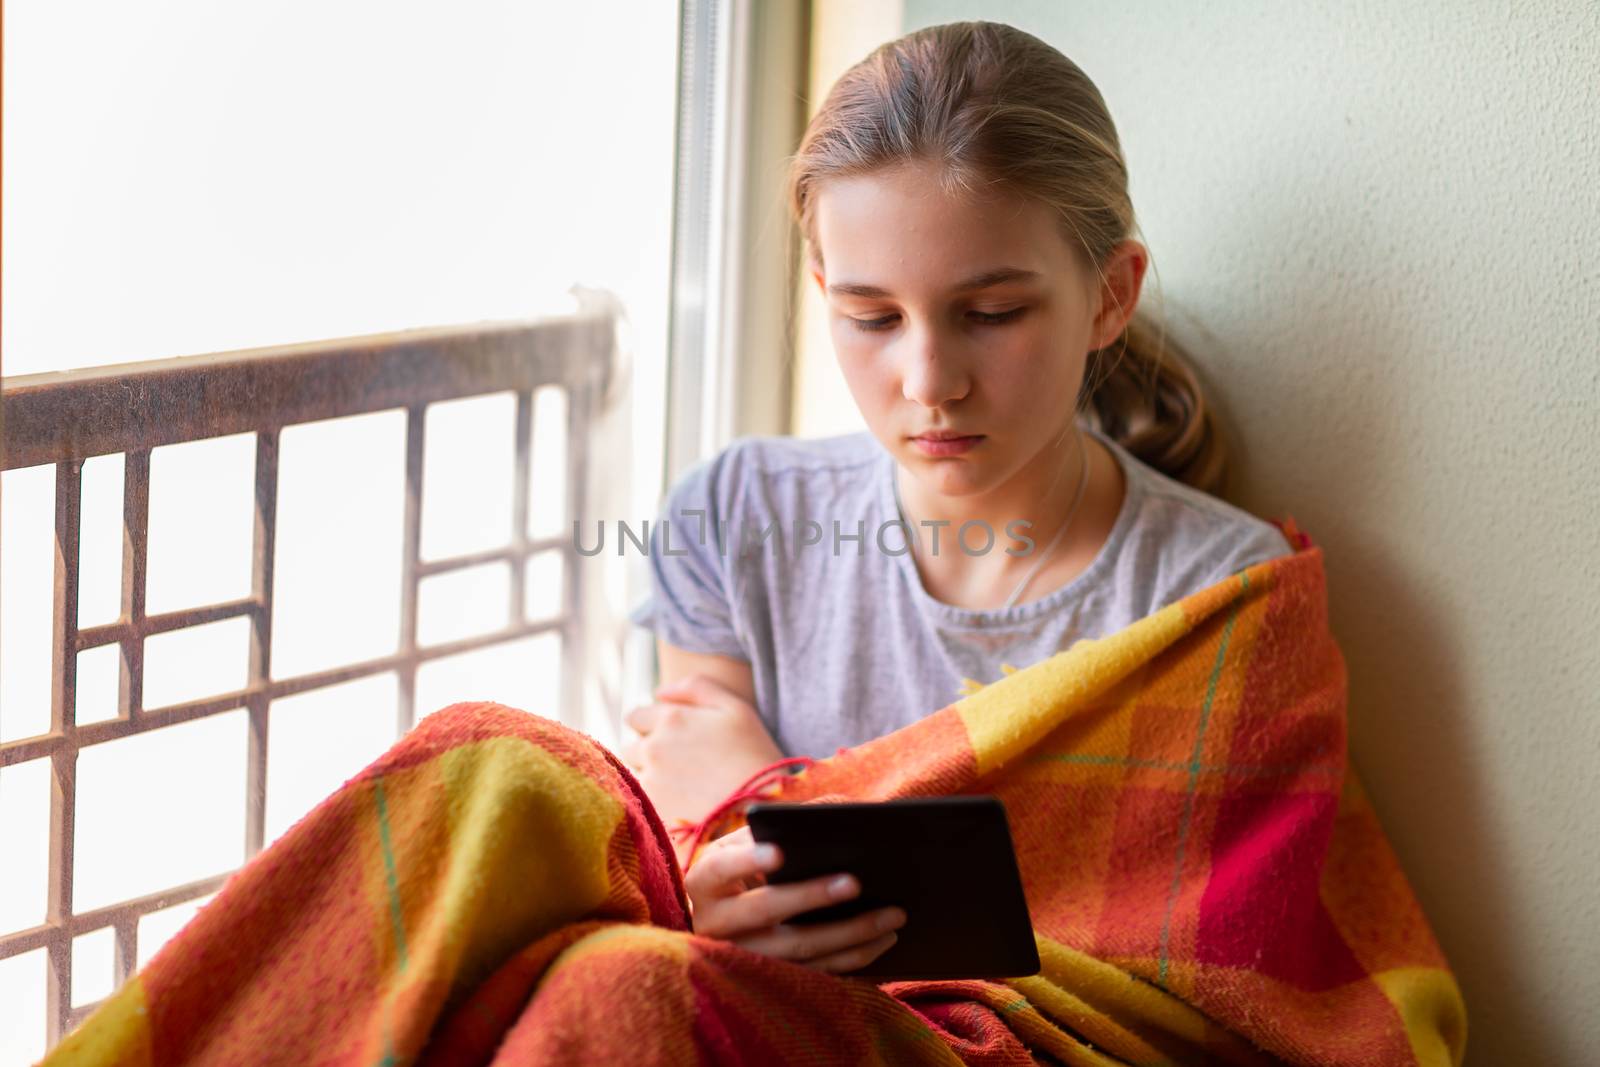 Sad little girl sitting on the window with e-book or tablet reading and studying at home isolated. Coronavirus quarantine distance education concept.